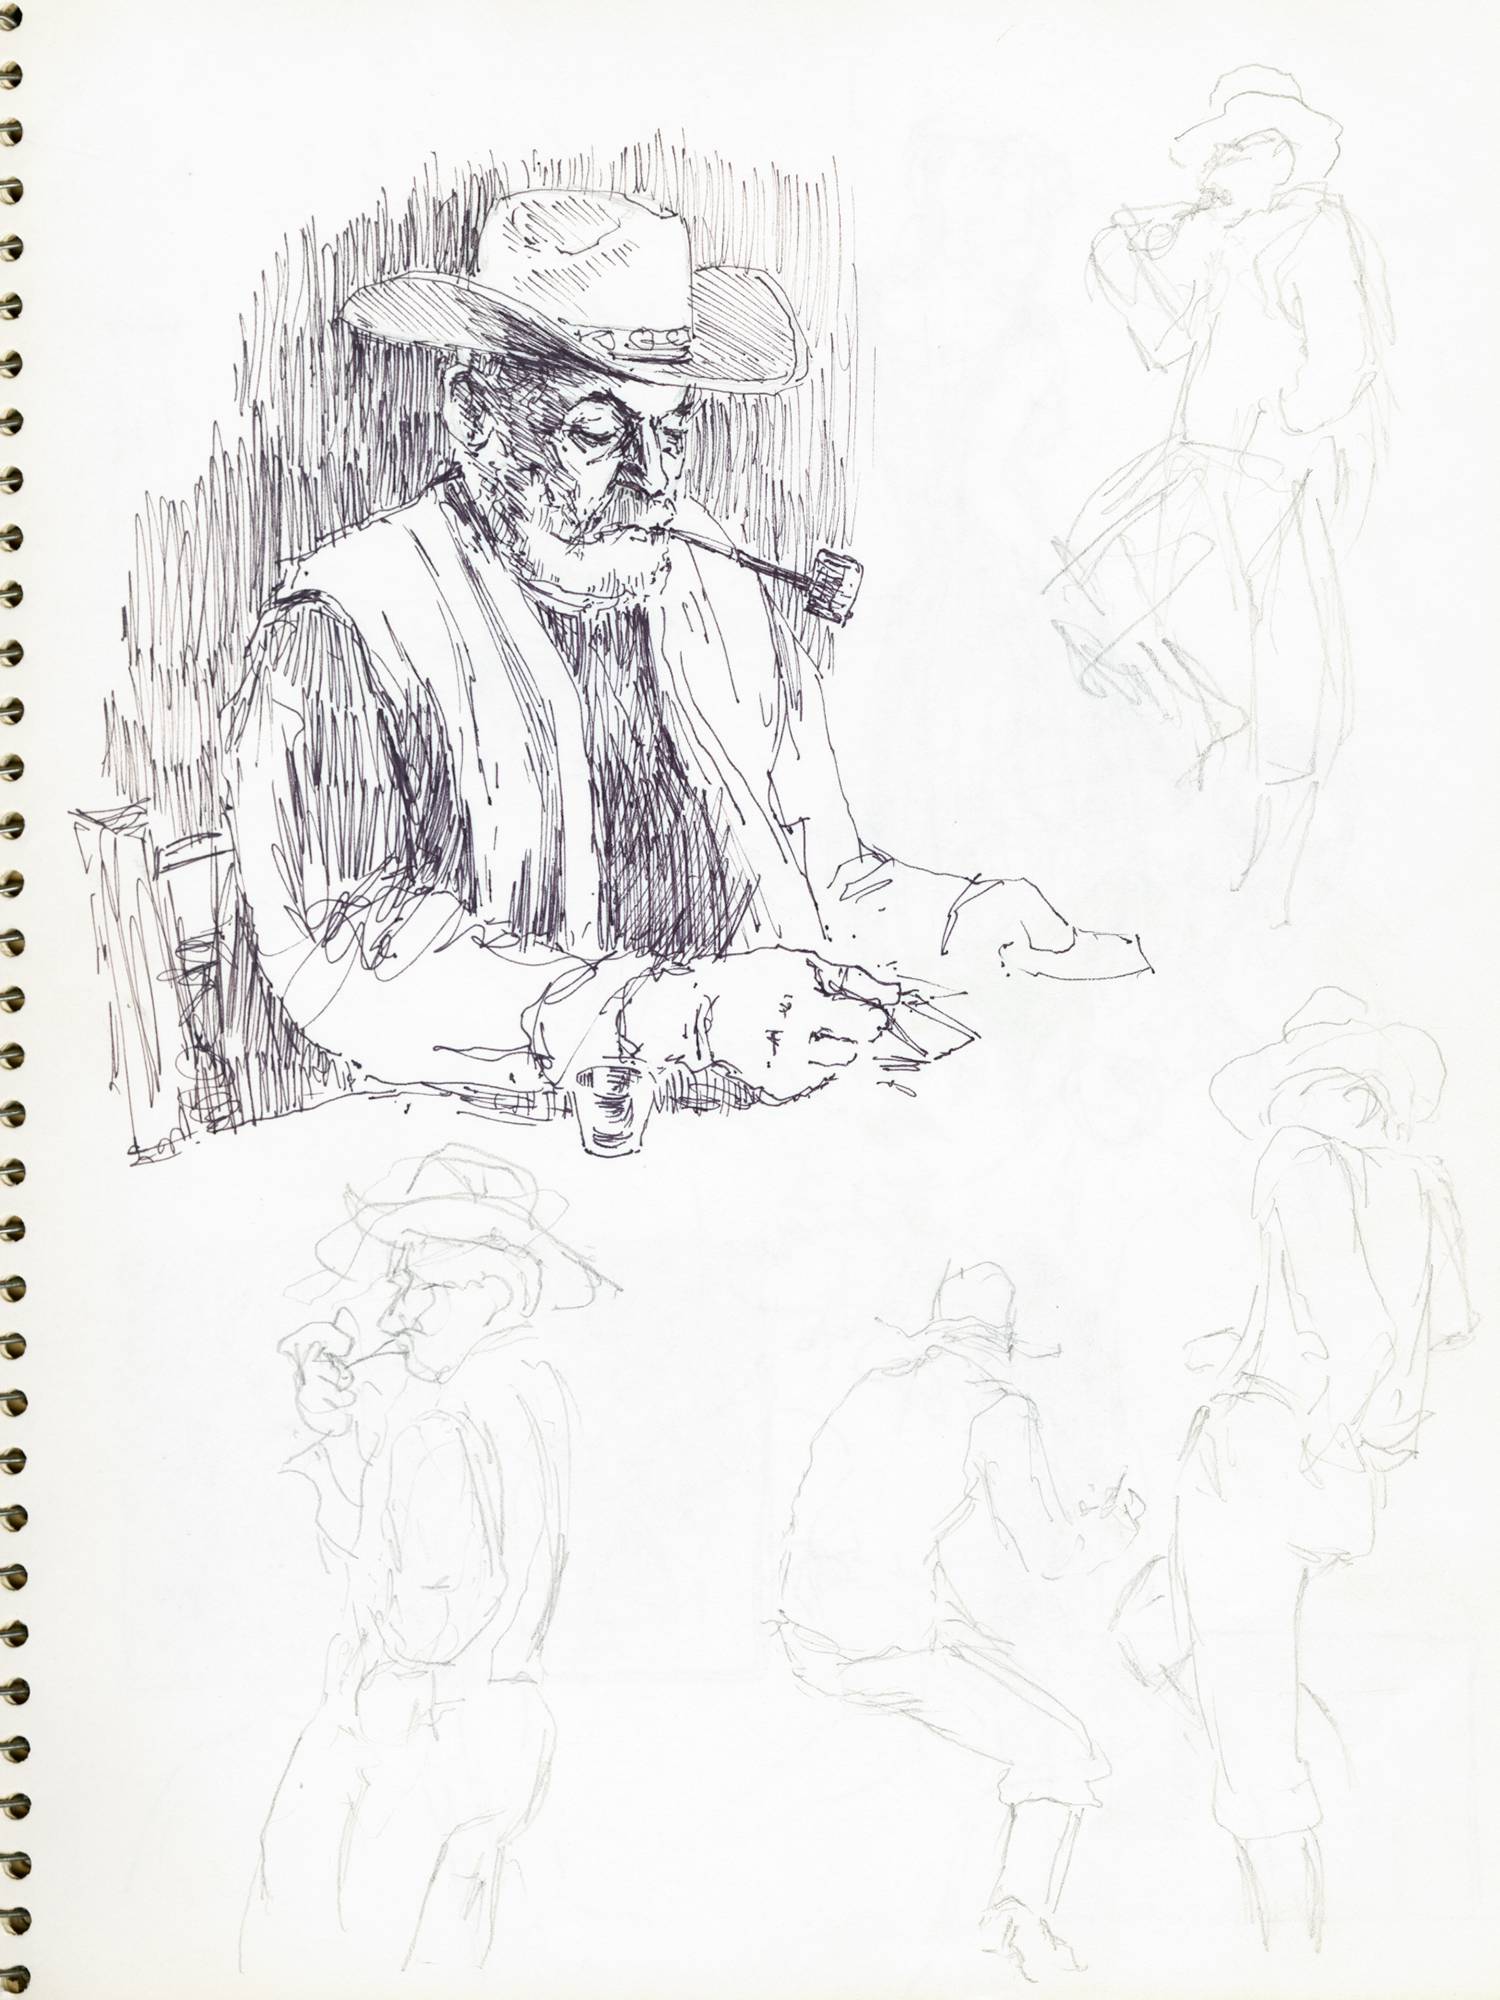 sketch of seated man with pipe